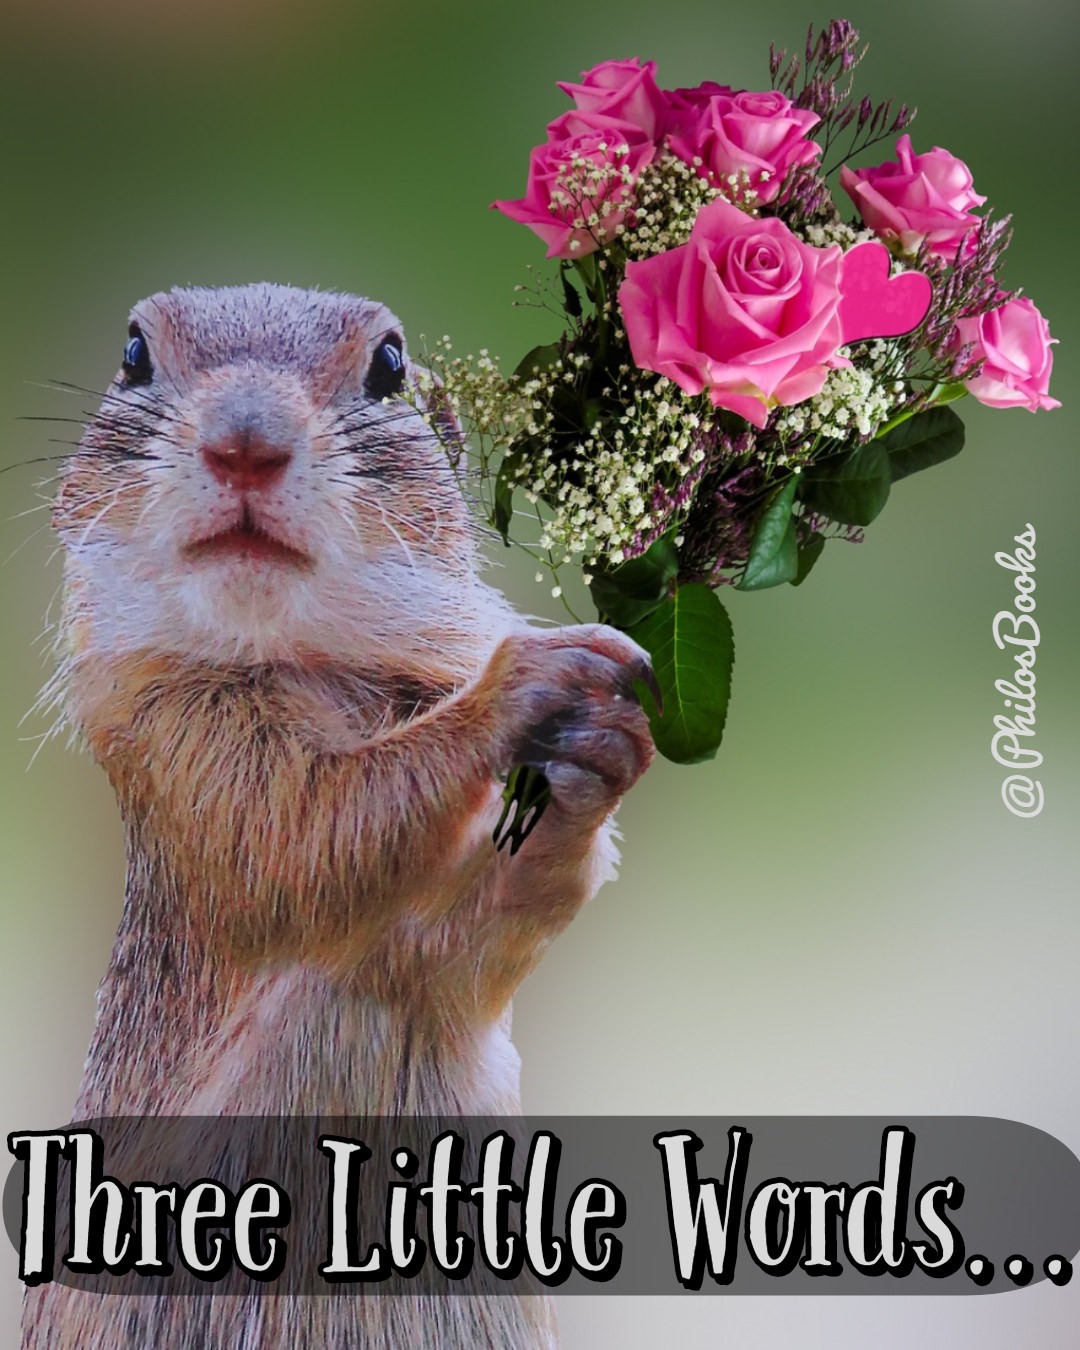 Three Little Words…Could Change the World!